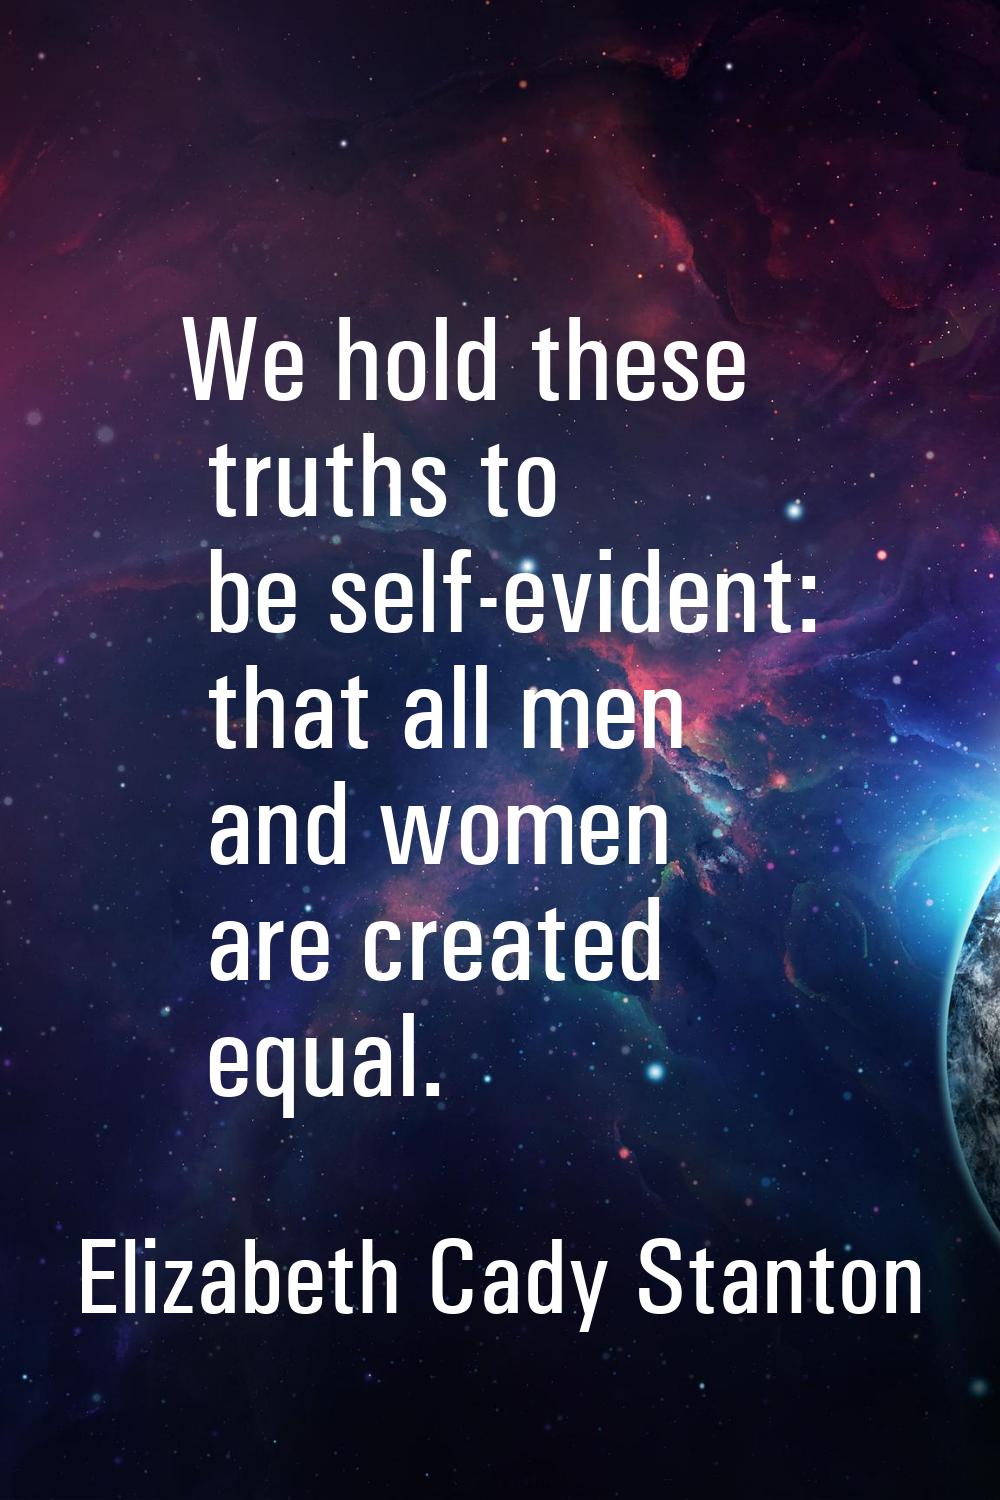 We hold these truths to be self-evident: that all men and women are created equal.